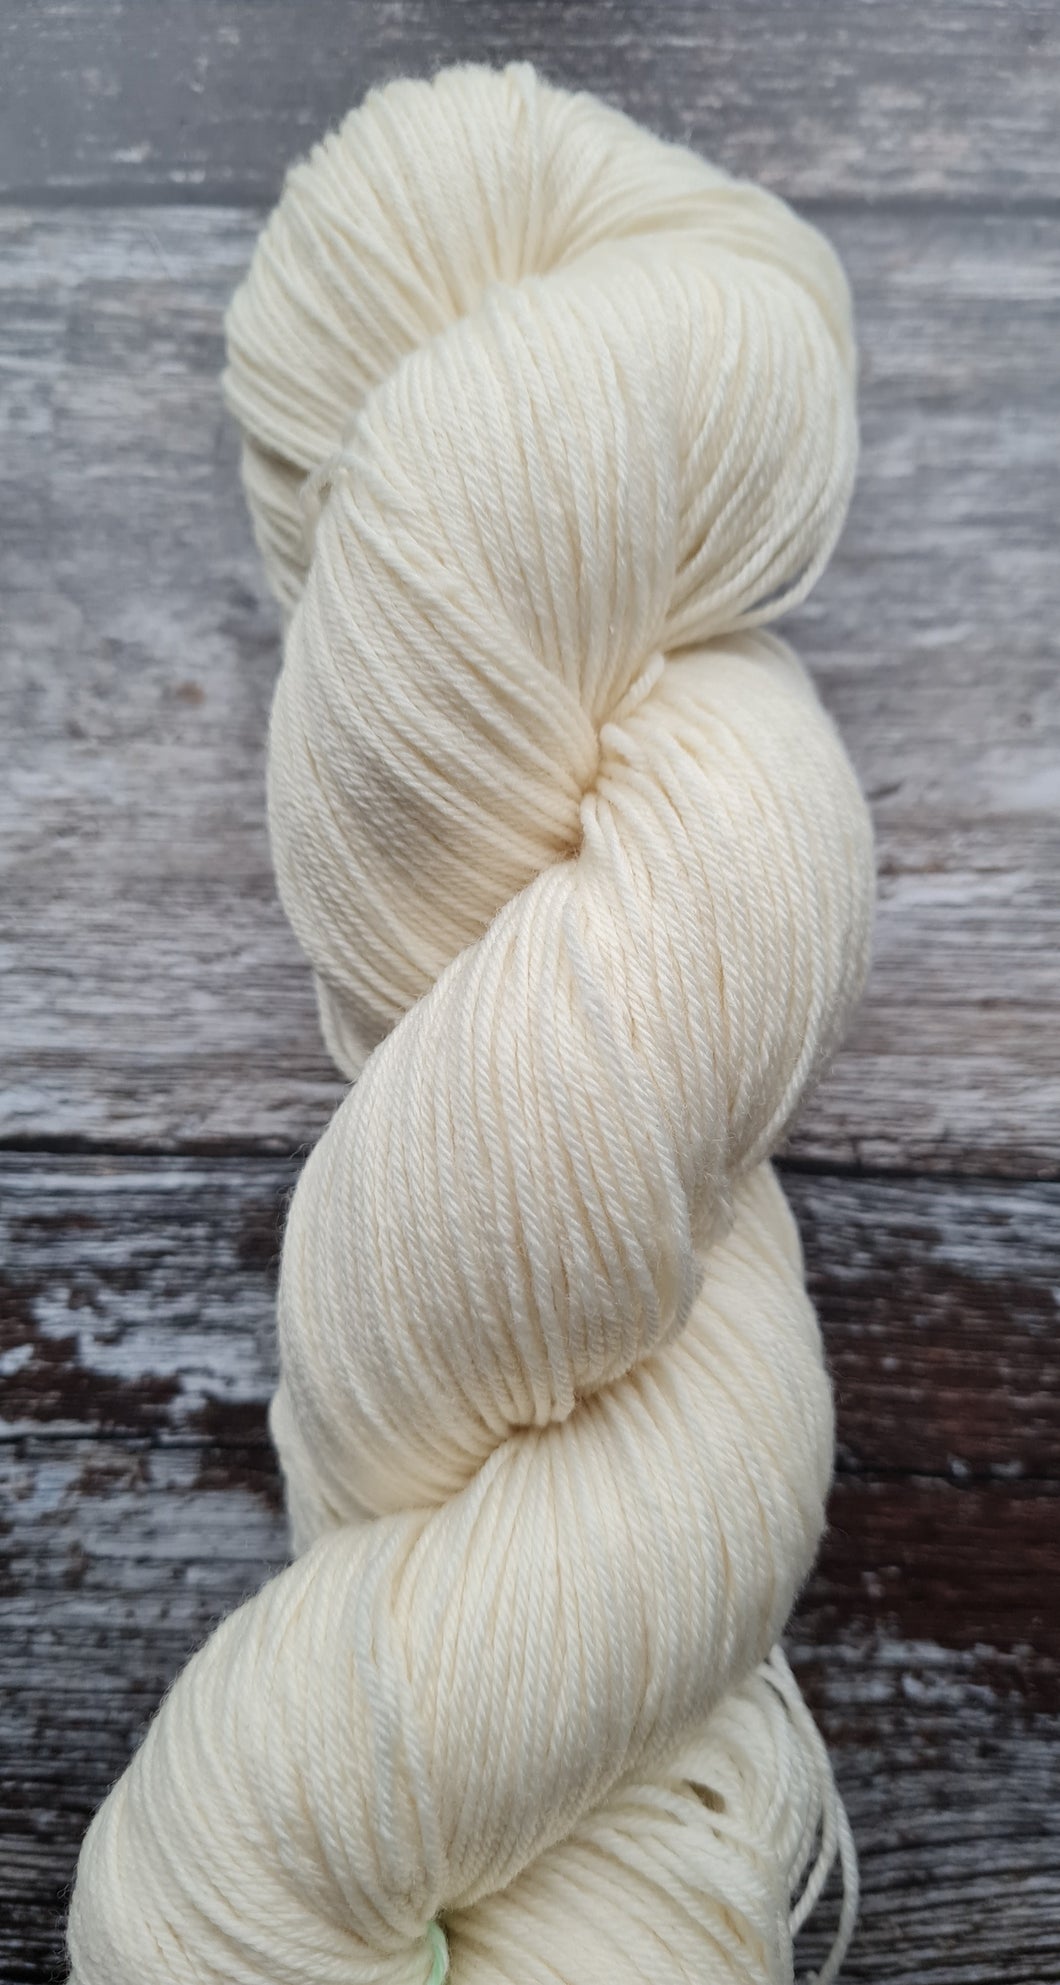 NATURAL(UNDYED)  SWM 75/25 50g 4PLY.